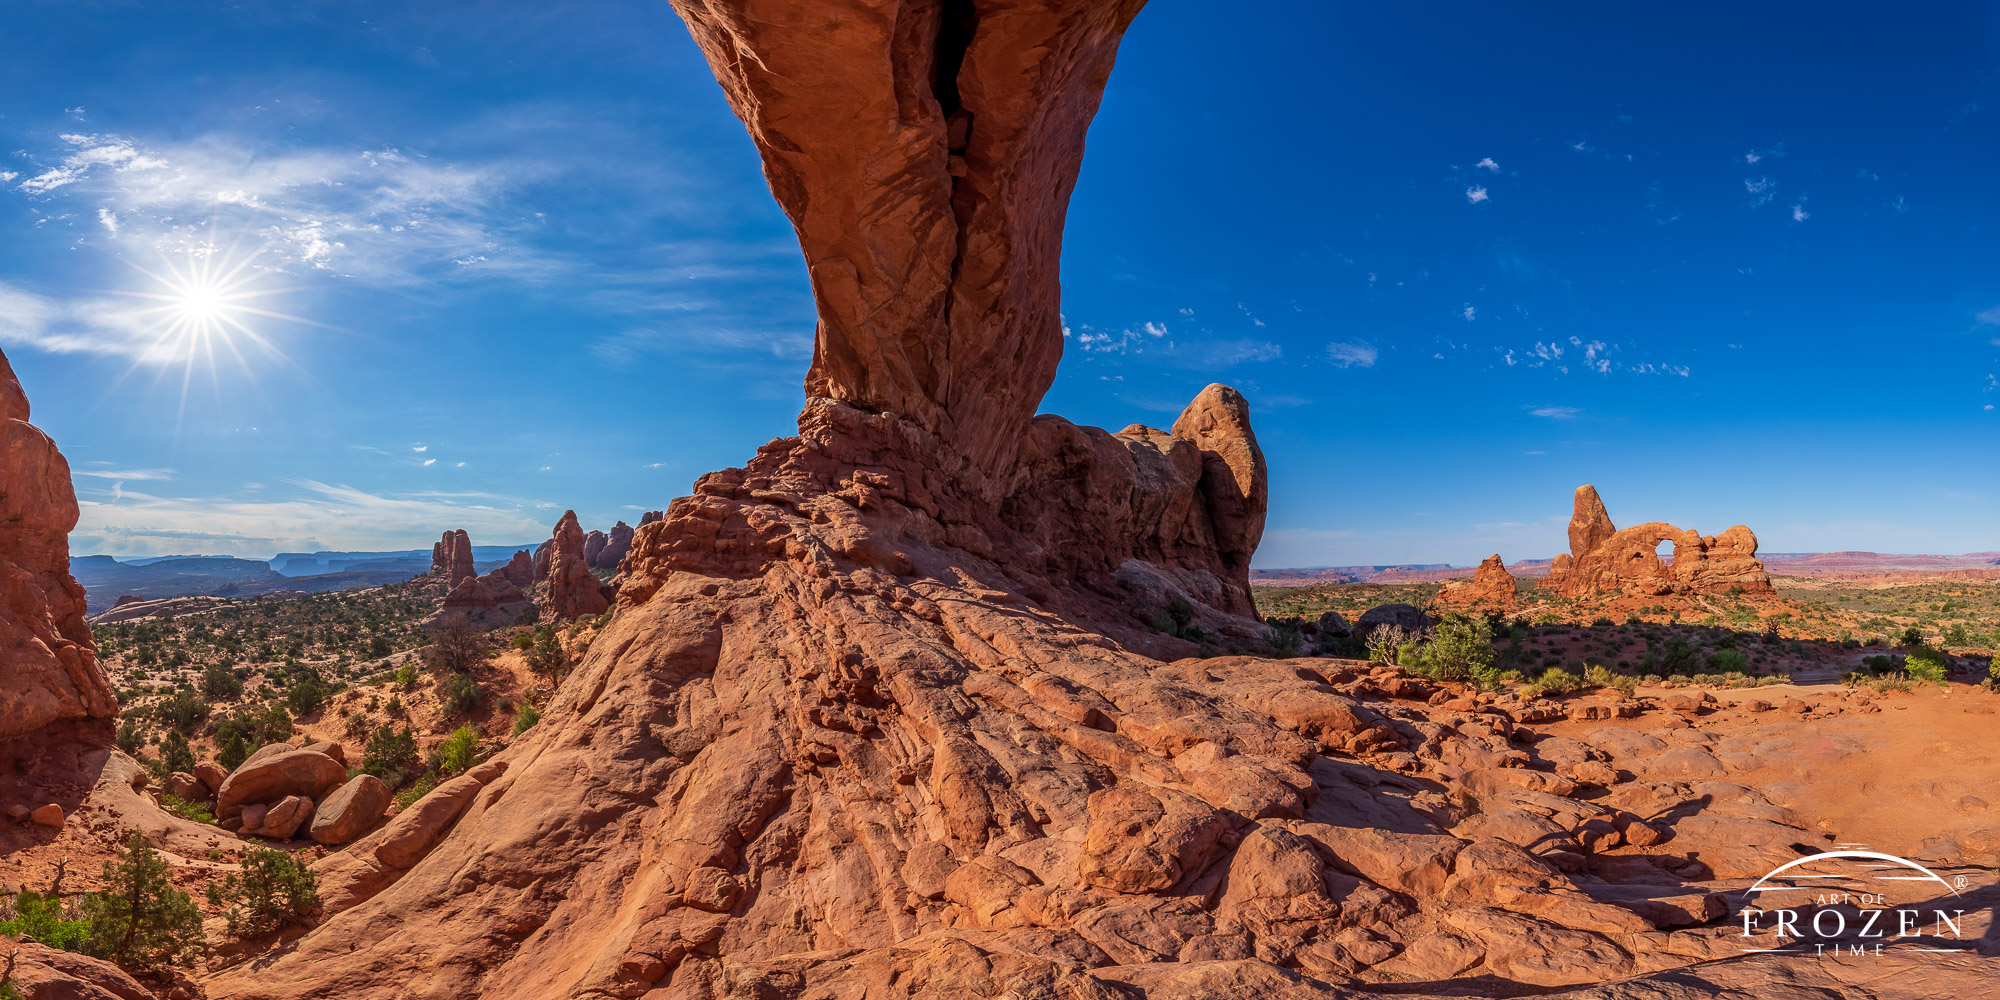 A panoramic sunrise from Arches National Park where the North Window arches to the center of the image and Turret Arch basks in the morning light